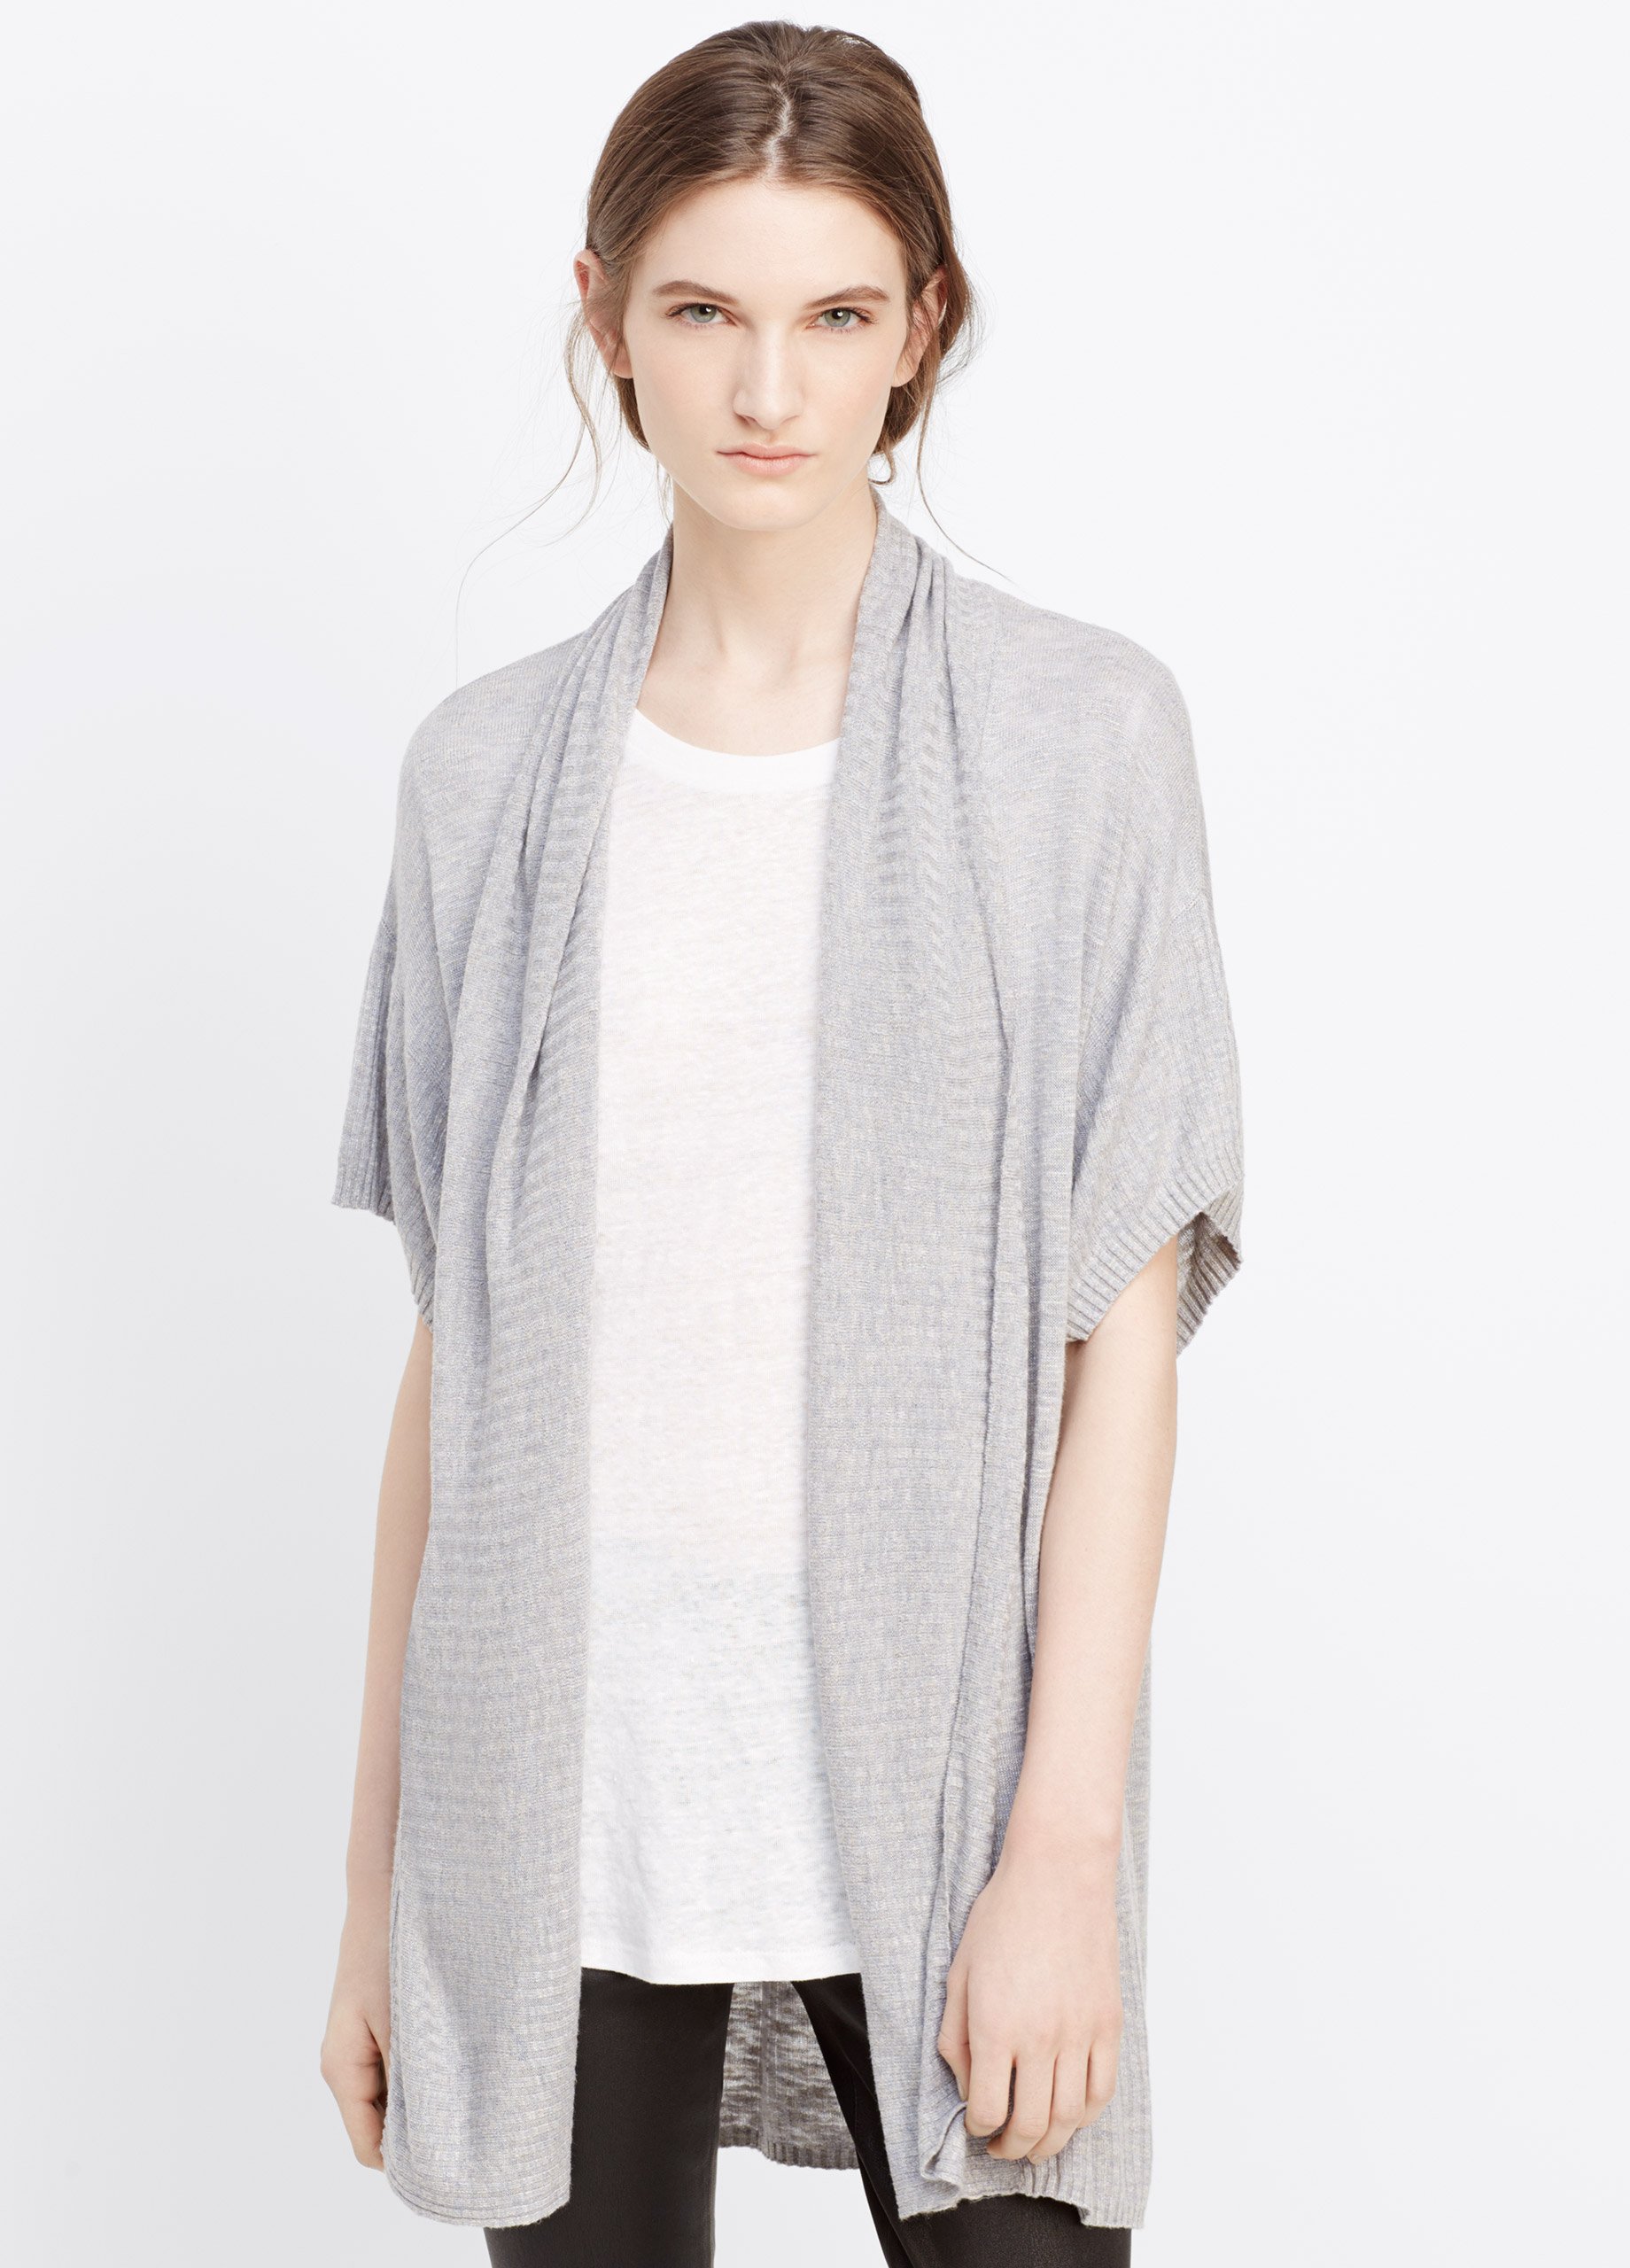 Short Sleeve Open Front Draped Cardigan - Cardigan With Buttons